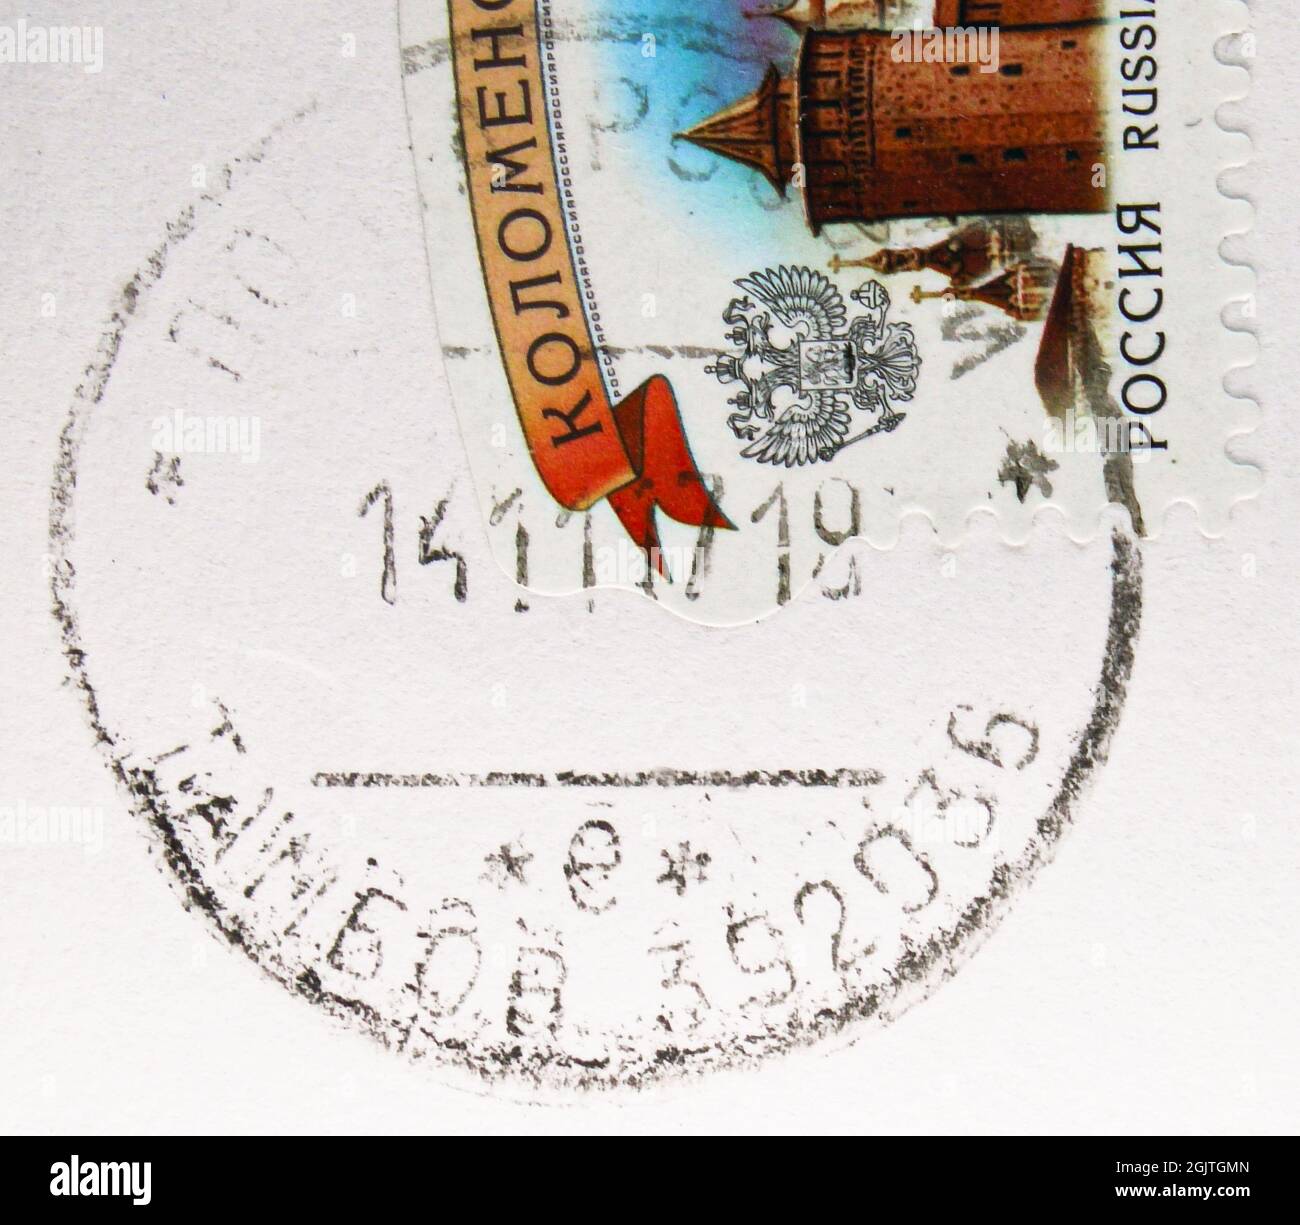 MOSCOW, RUSSIA - JUNE 10, 2021: Postage stamp printed in Russia of Pervomaysky post office, Tambov region, dated 2019 Stock Photo